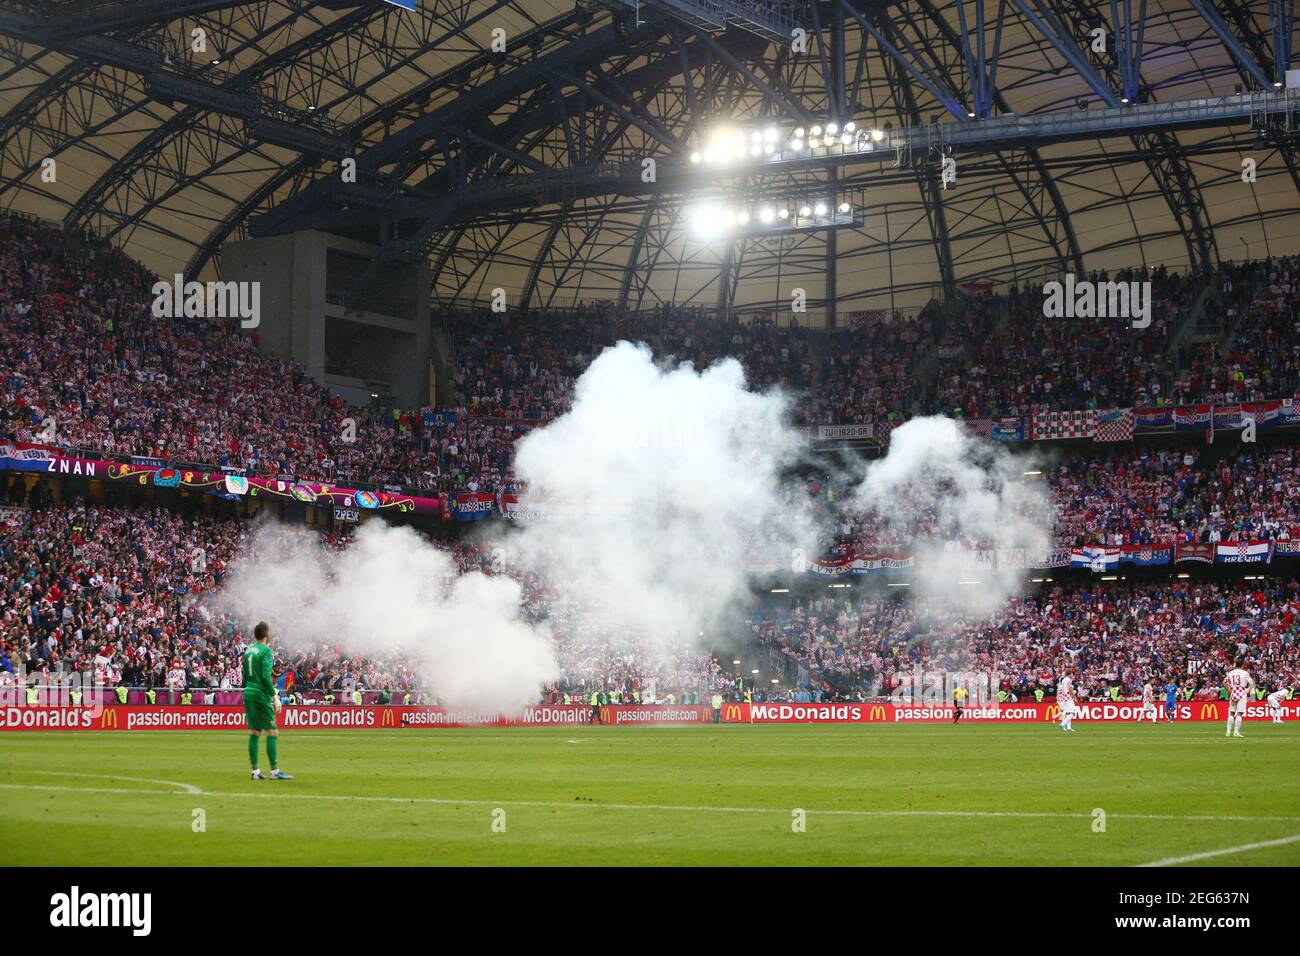 Football - Italy v Croatia - UEFA EURO 2012 Group C  - Municipal Stadium, Poznan, Poland - 14/6/12  General view as a flare is set off during the match  Mandatory Credit: Action Images / Jason Cairnduff  Livepic Stock Photo